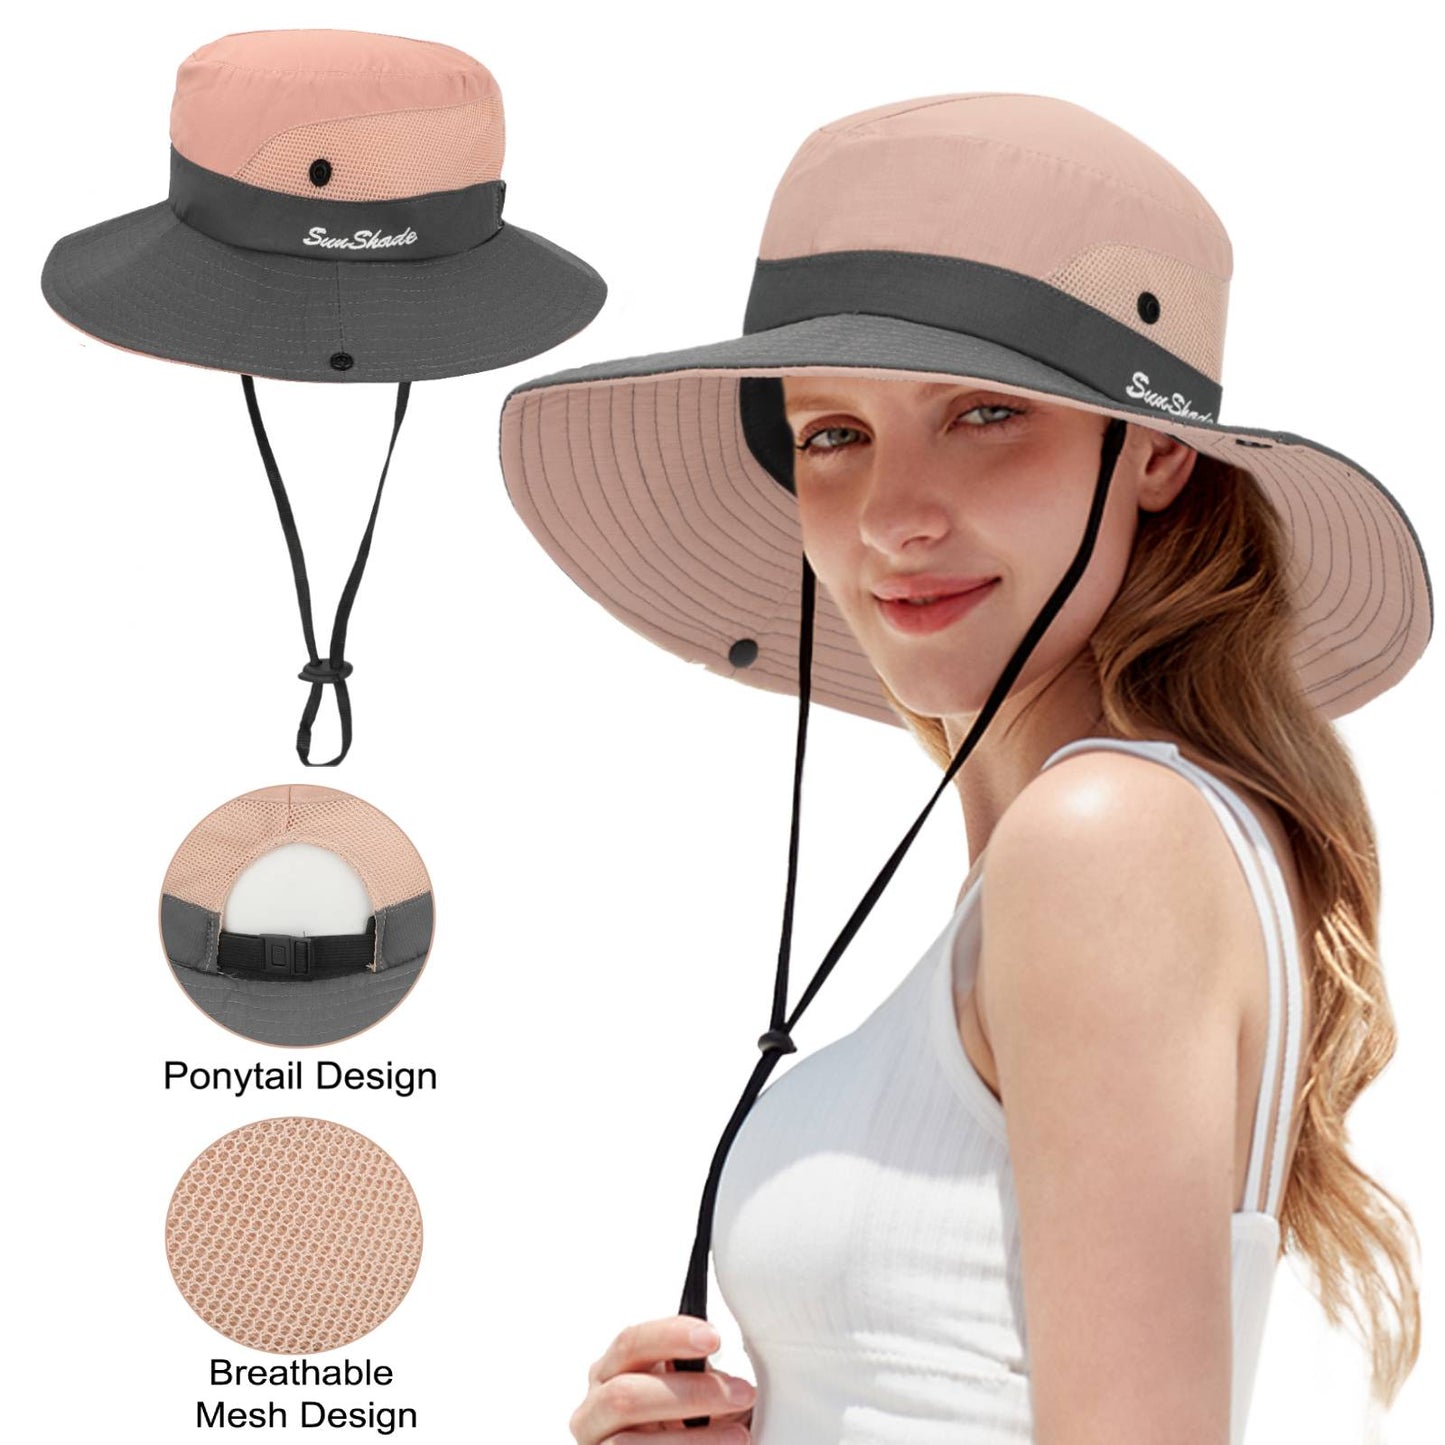 Sun Visor Hats - Ultimate Sun Protection with Wide Brim and Convertible Design